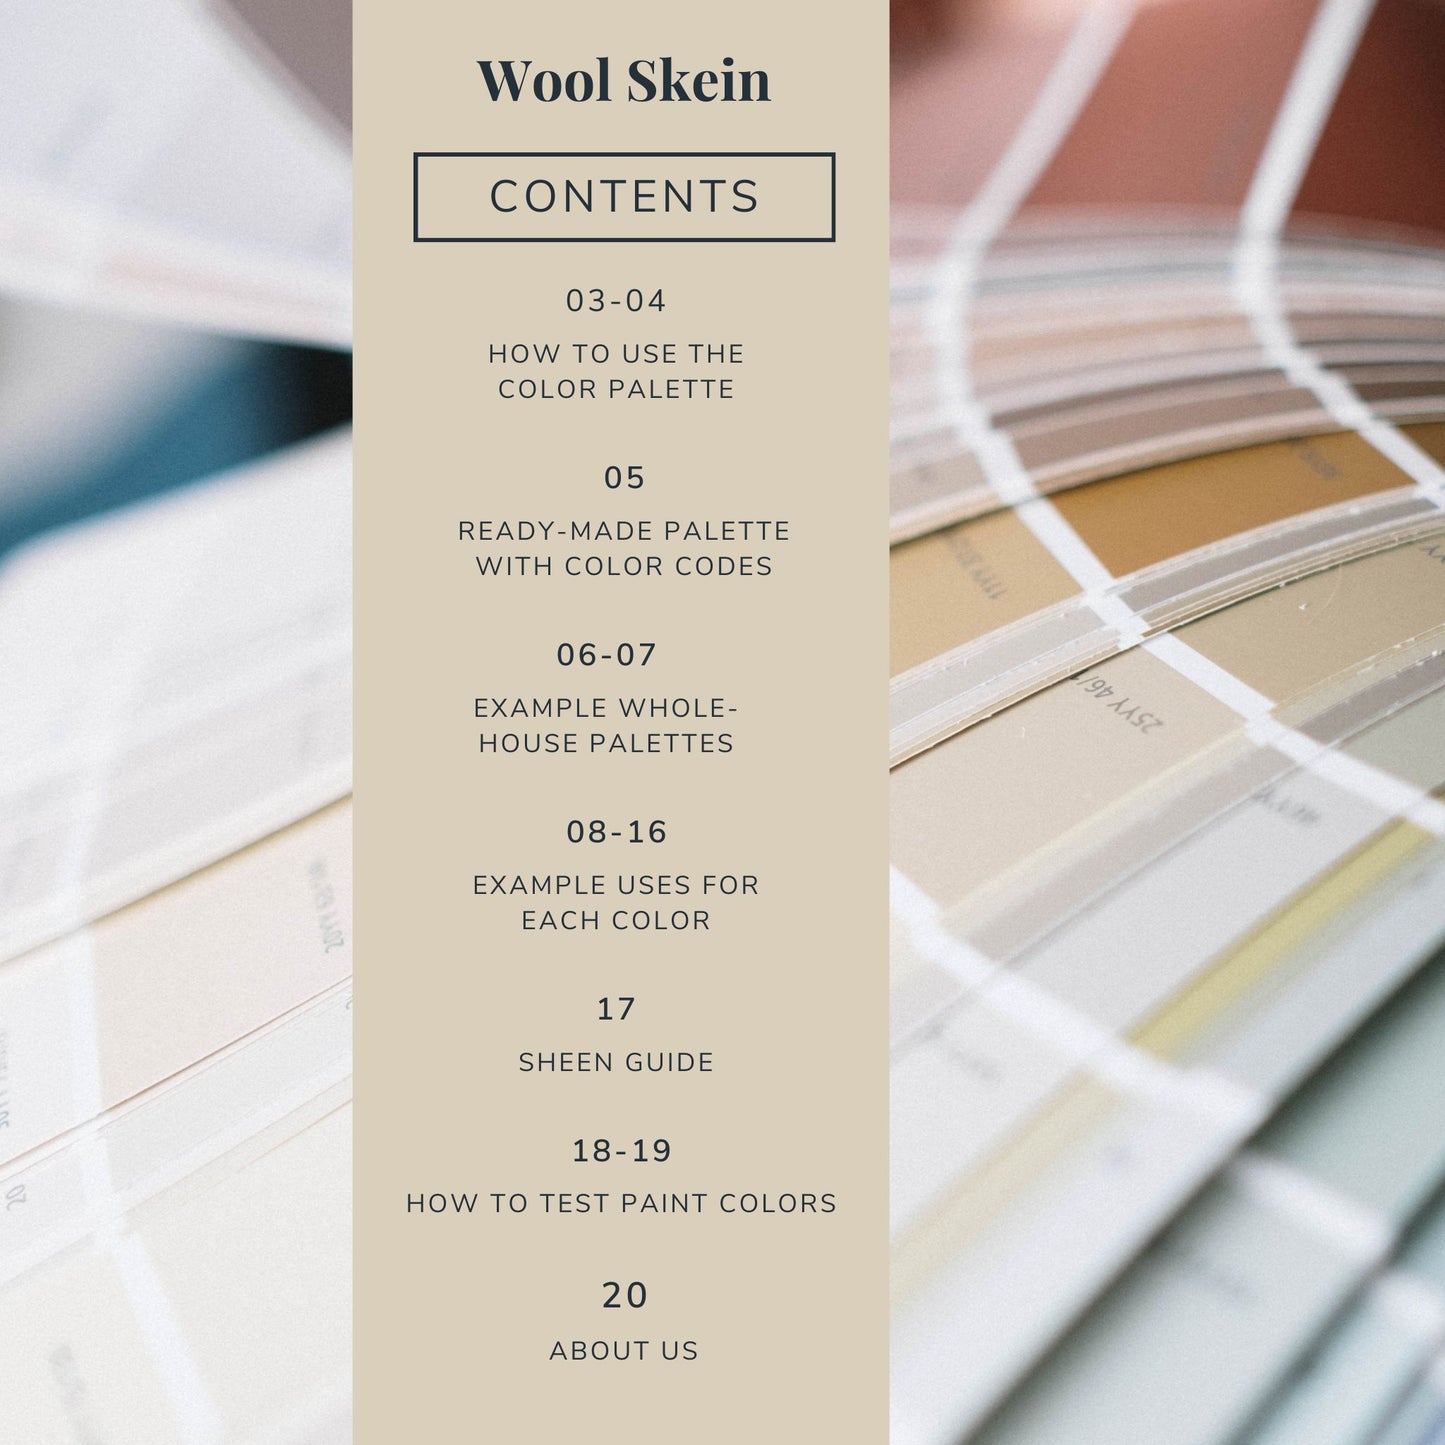 Sherwin-Williams Wool Skein Color Palette Guide